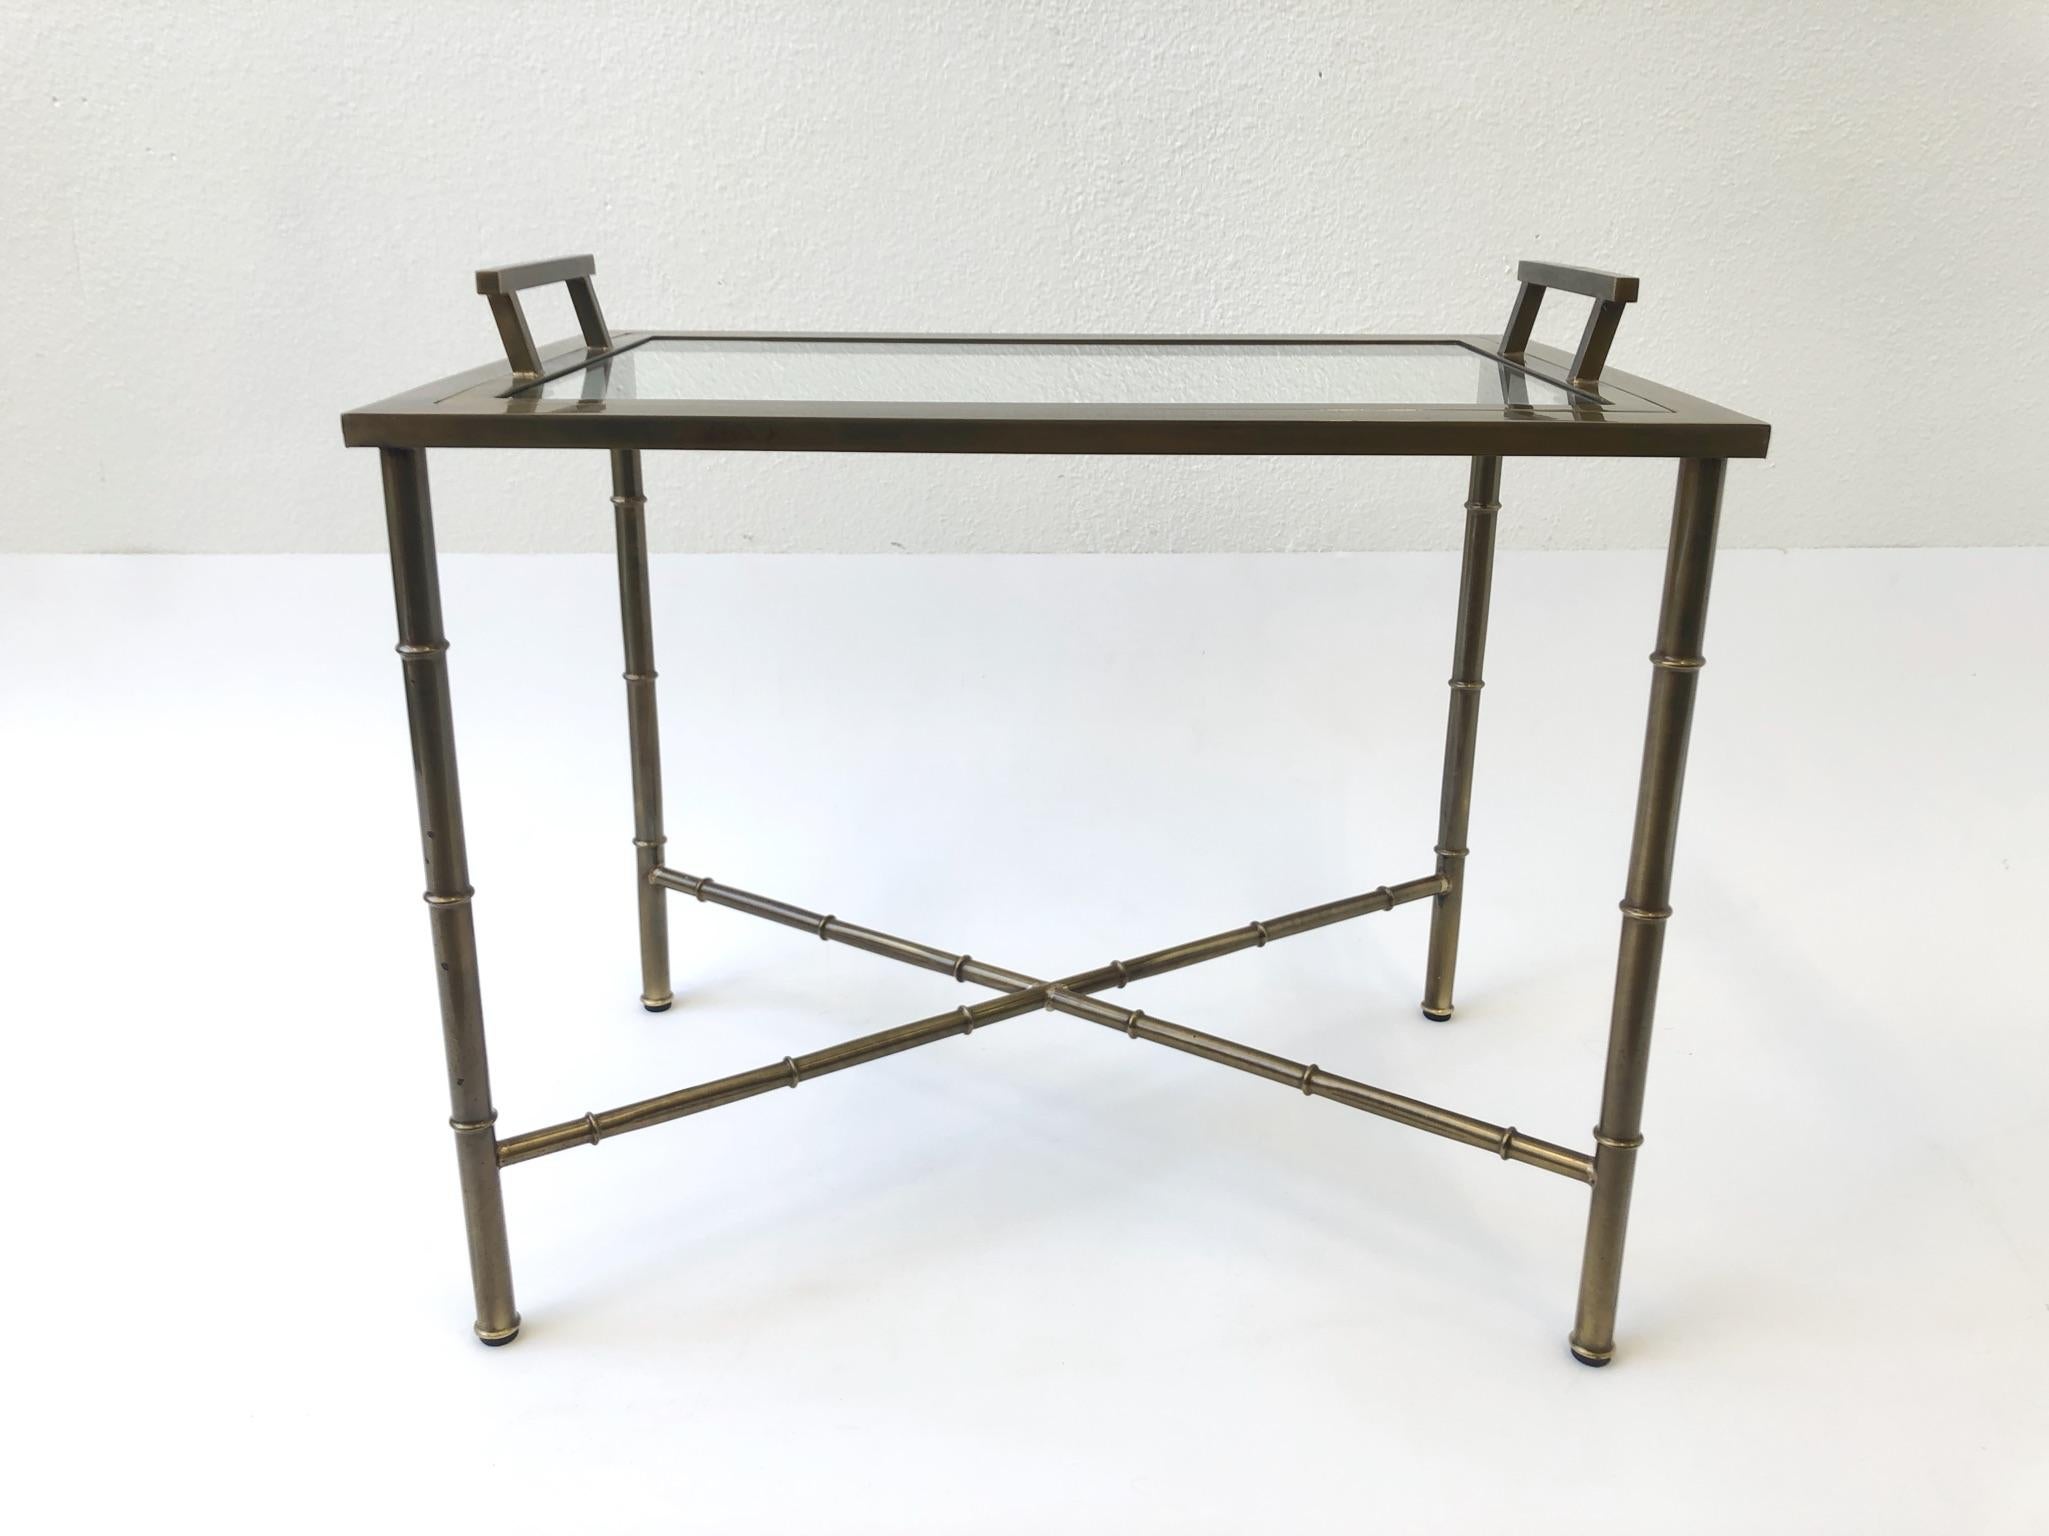 Aged Brass and Glass Faux Bamboo Tray Table by Mastercraft 1